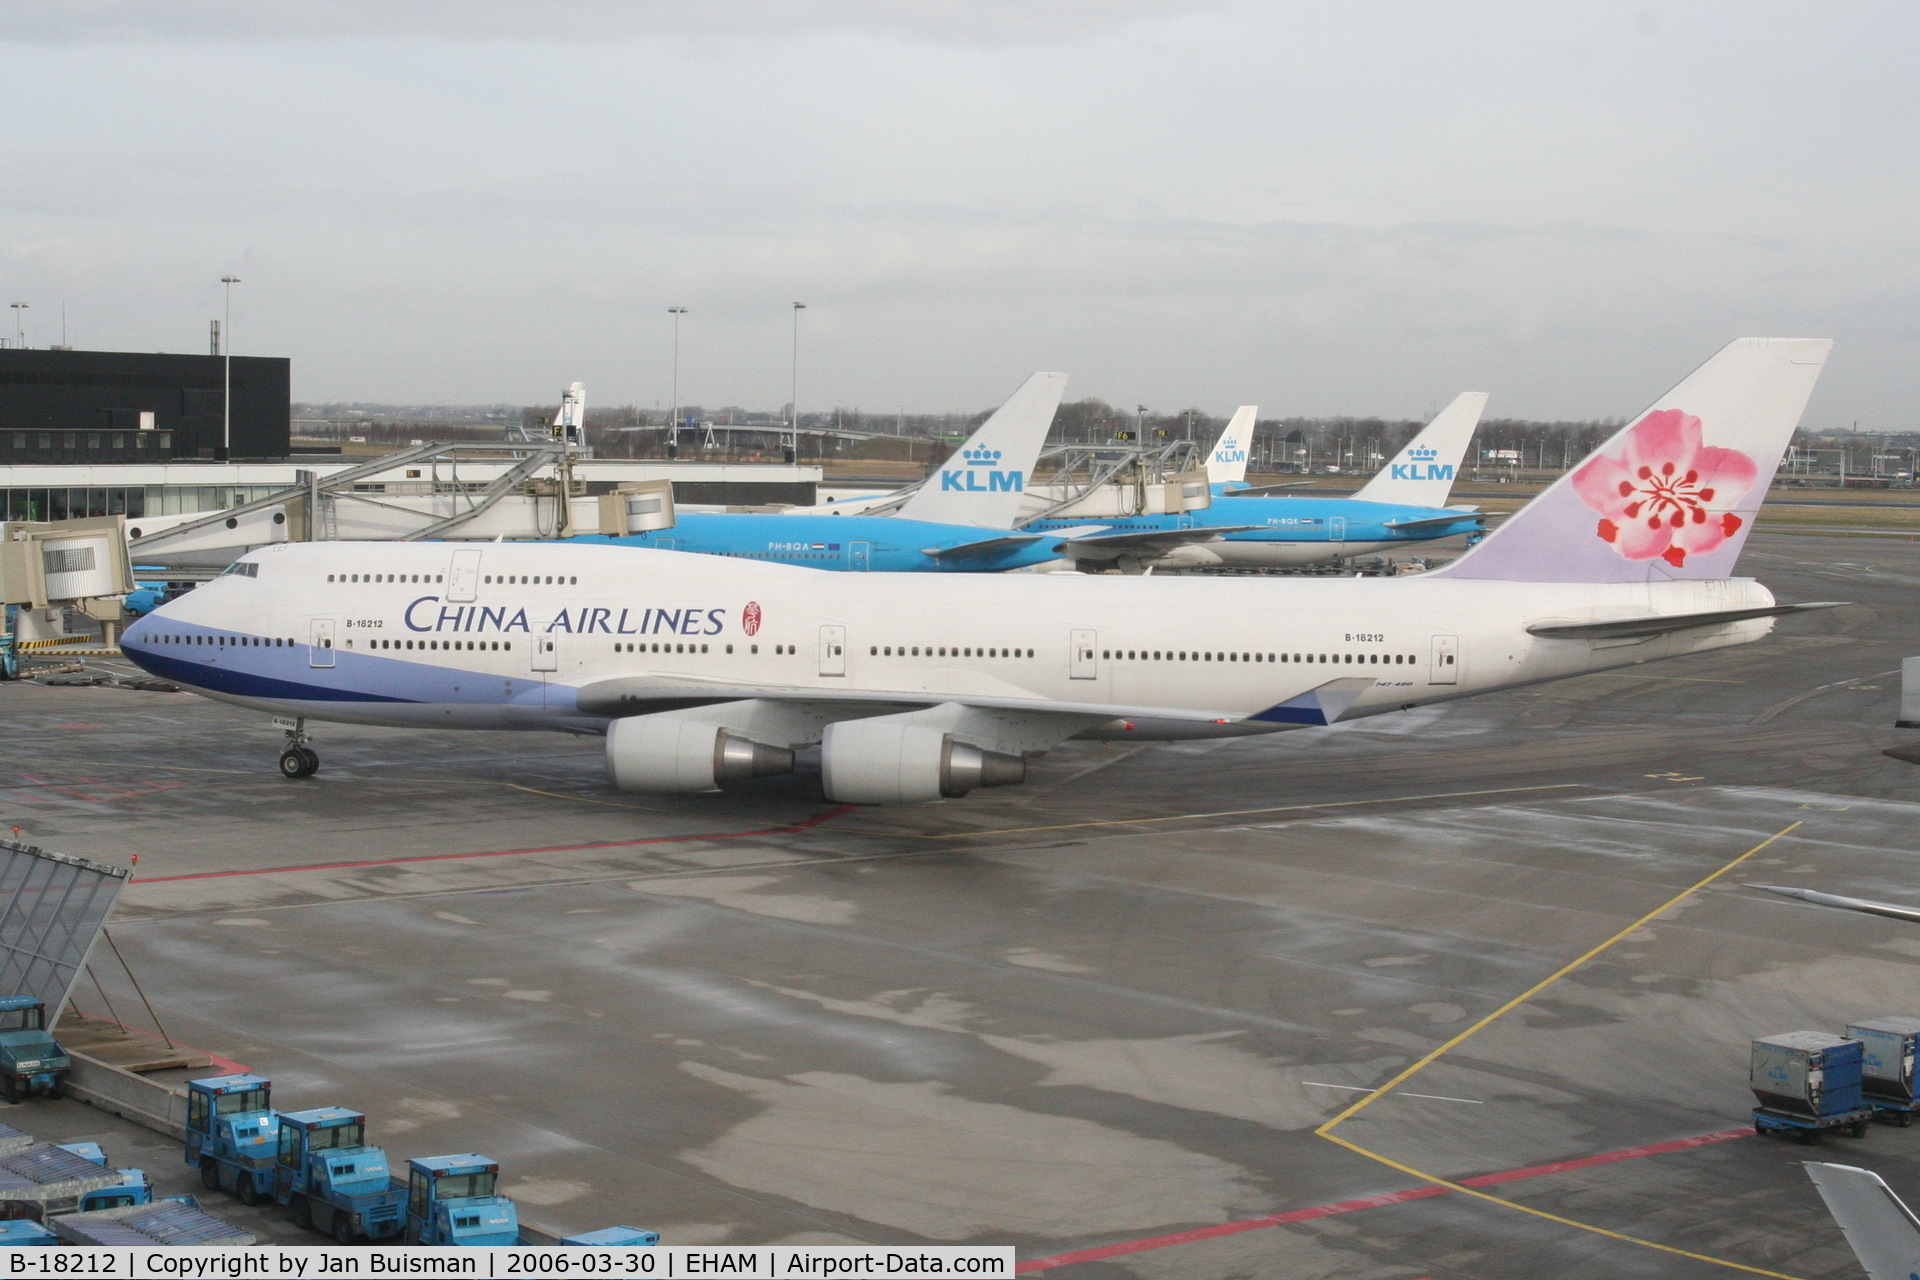 B-18212, 2005 Boeing 747-409 C/N 33736, China Airlines